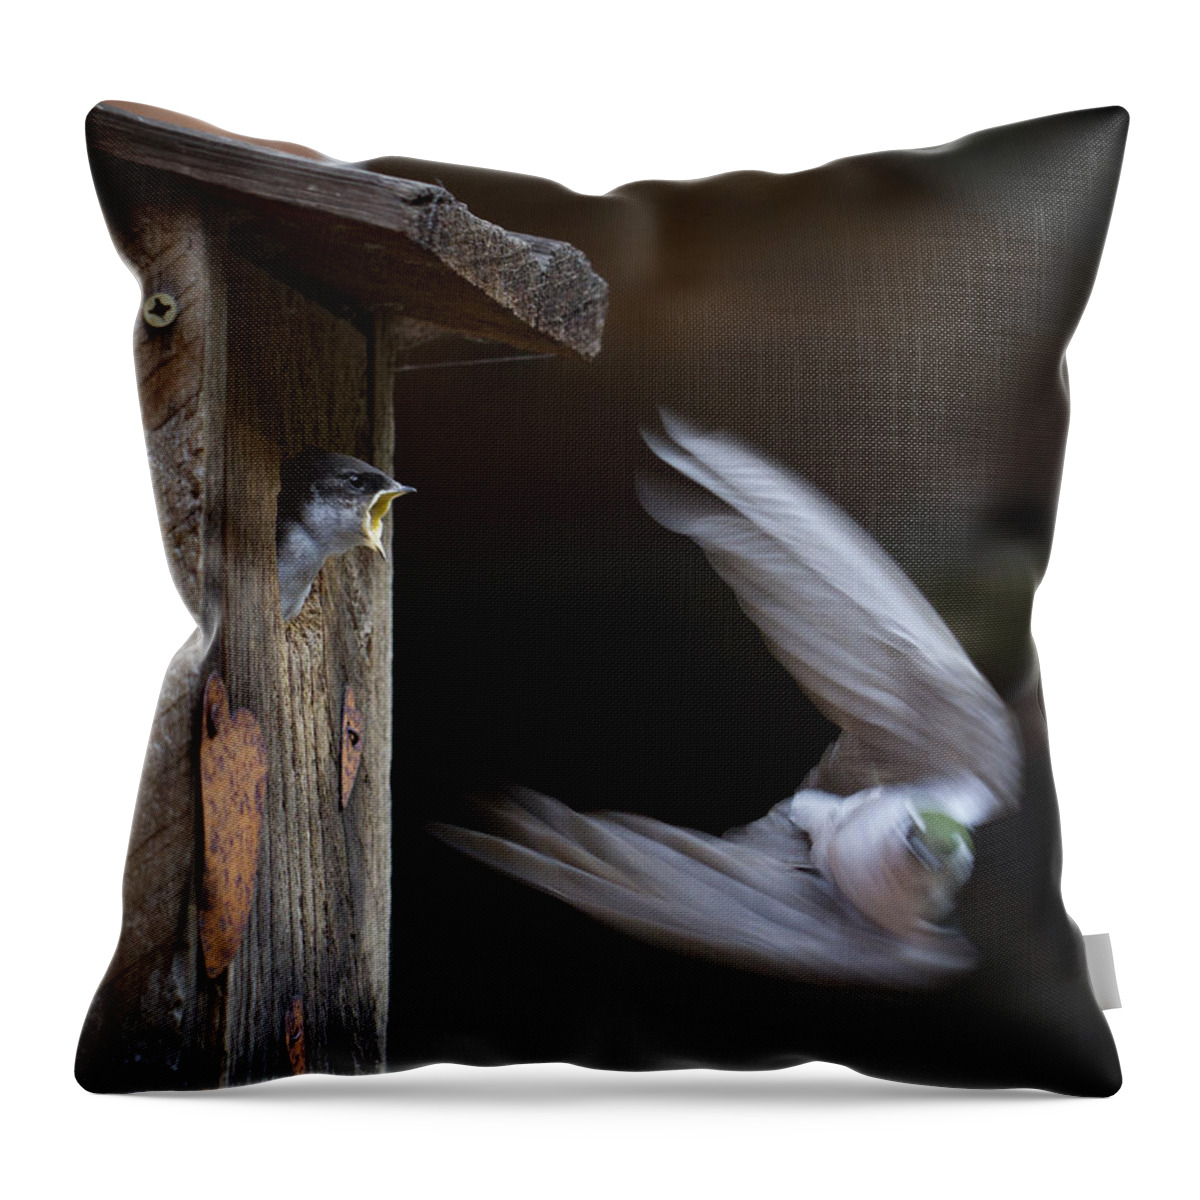 Home Throw Pillow featuring the photograph Dont Leave by Jean Noren